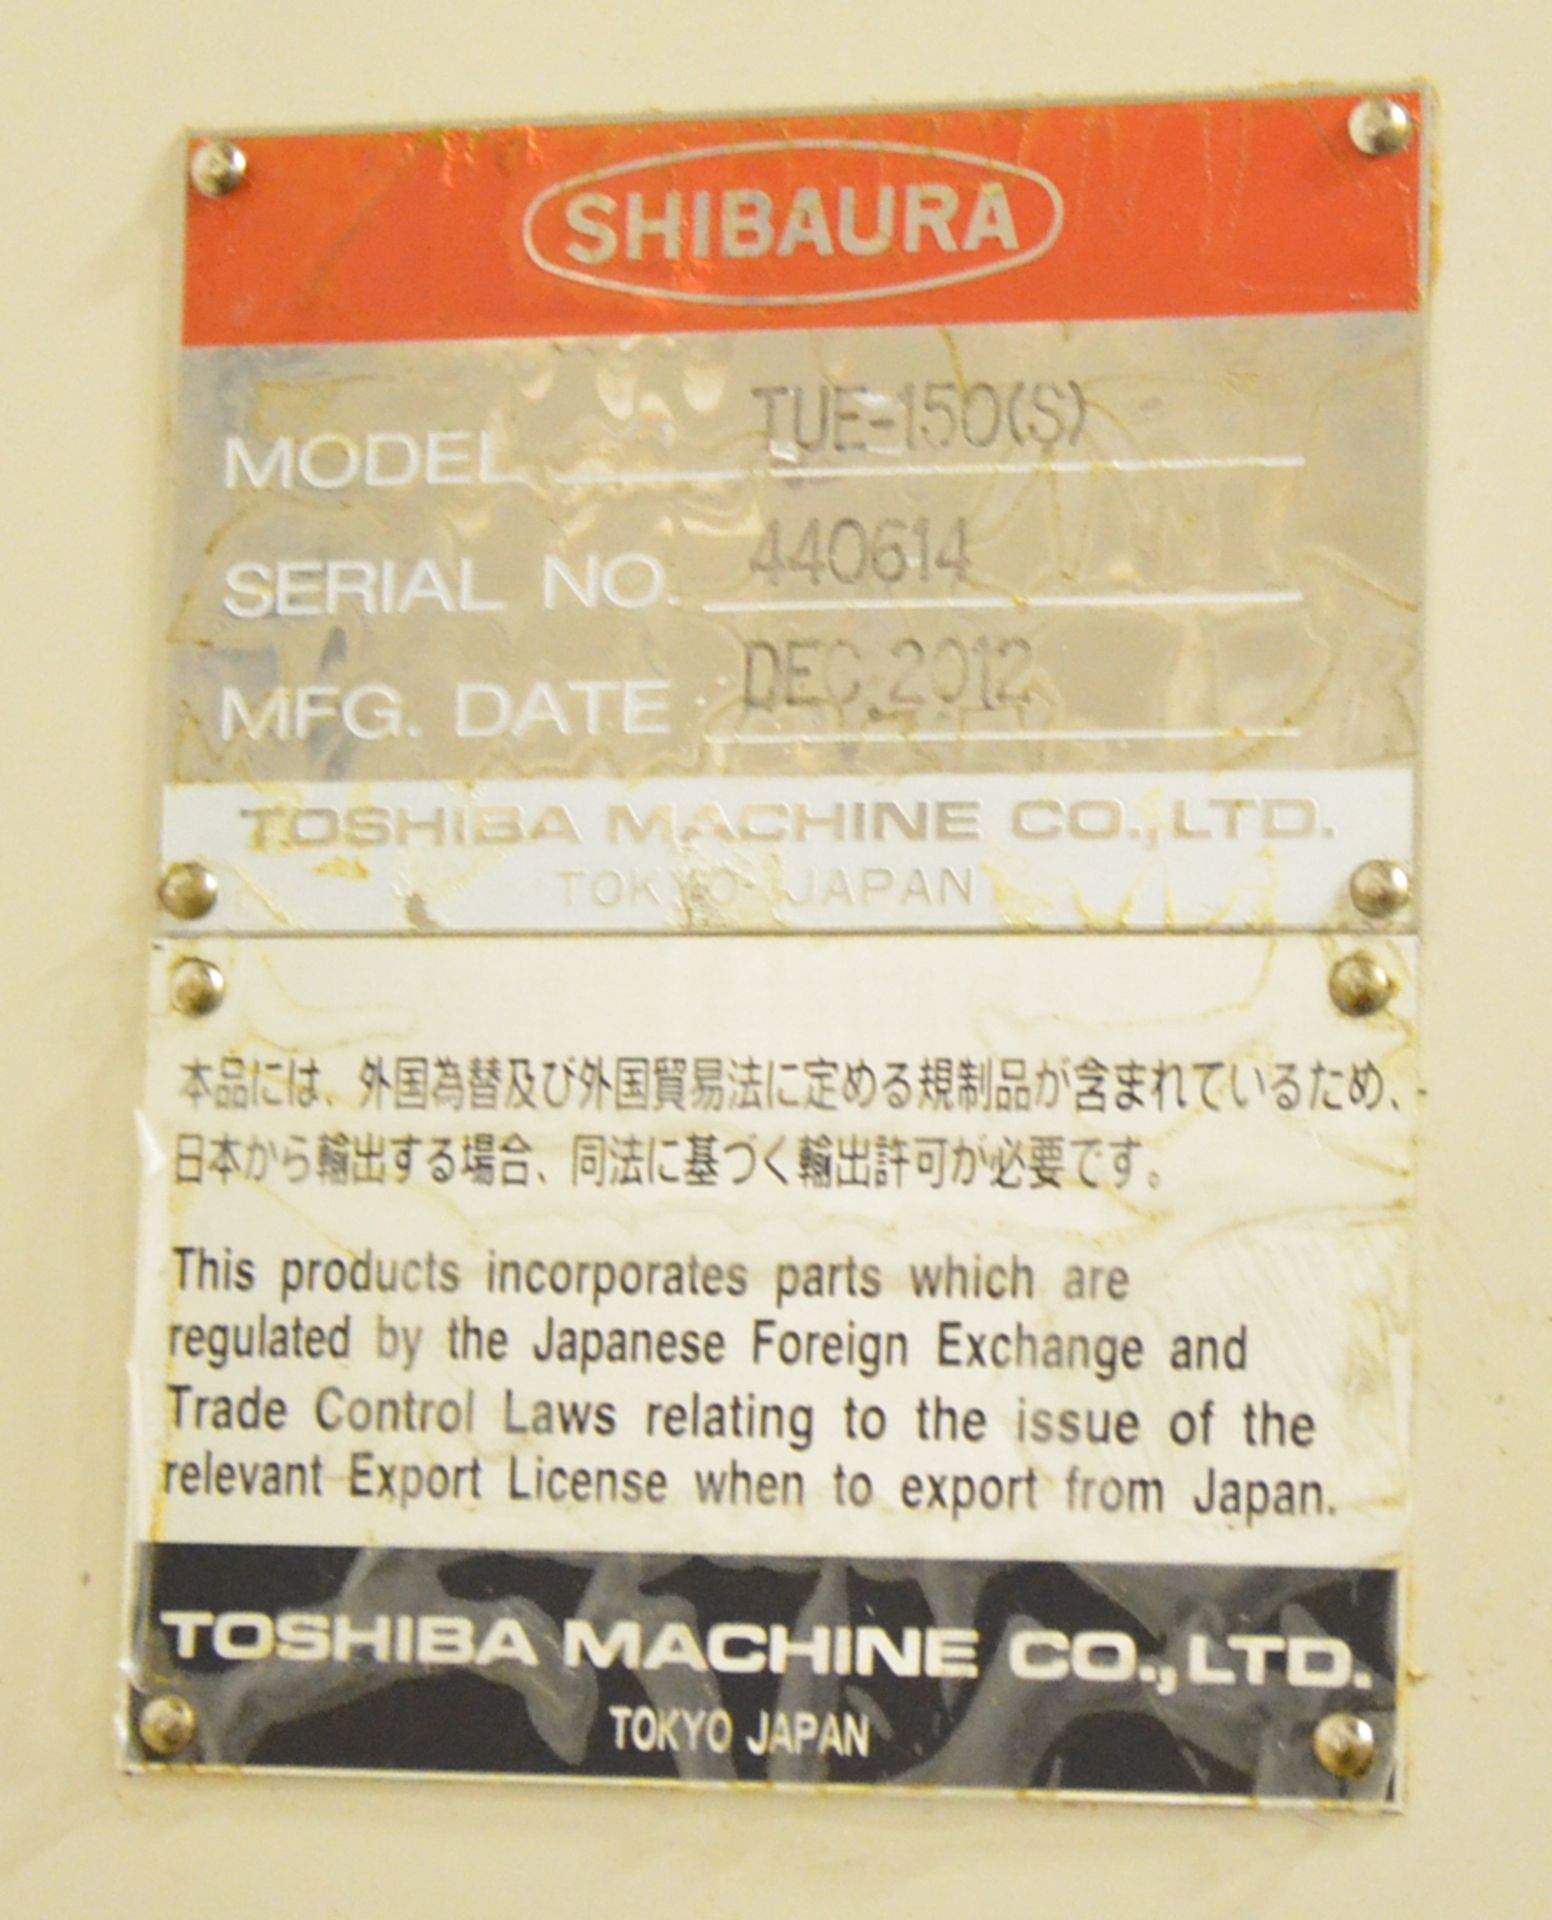 TOSHIBA SHIBAURA (12-2012) TUE-150(S) CNC VERTICAL BORING AND LIVE MILLING CENTER WITH FANUC OI-TD - Image 24 of 37